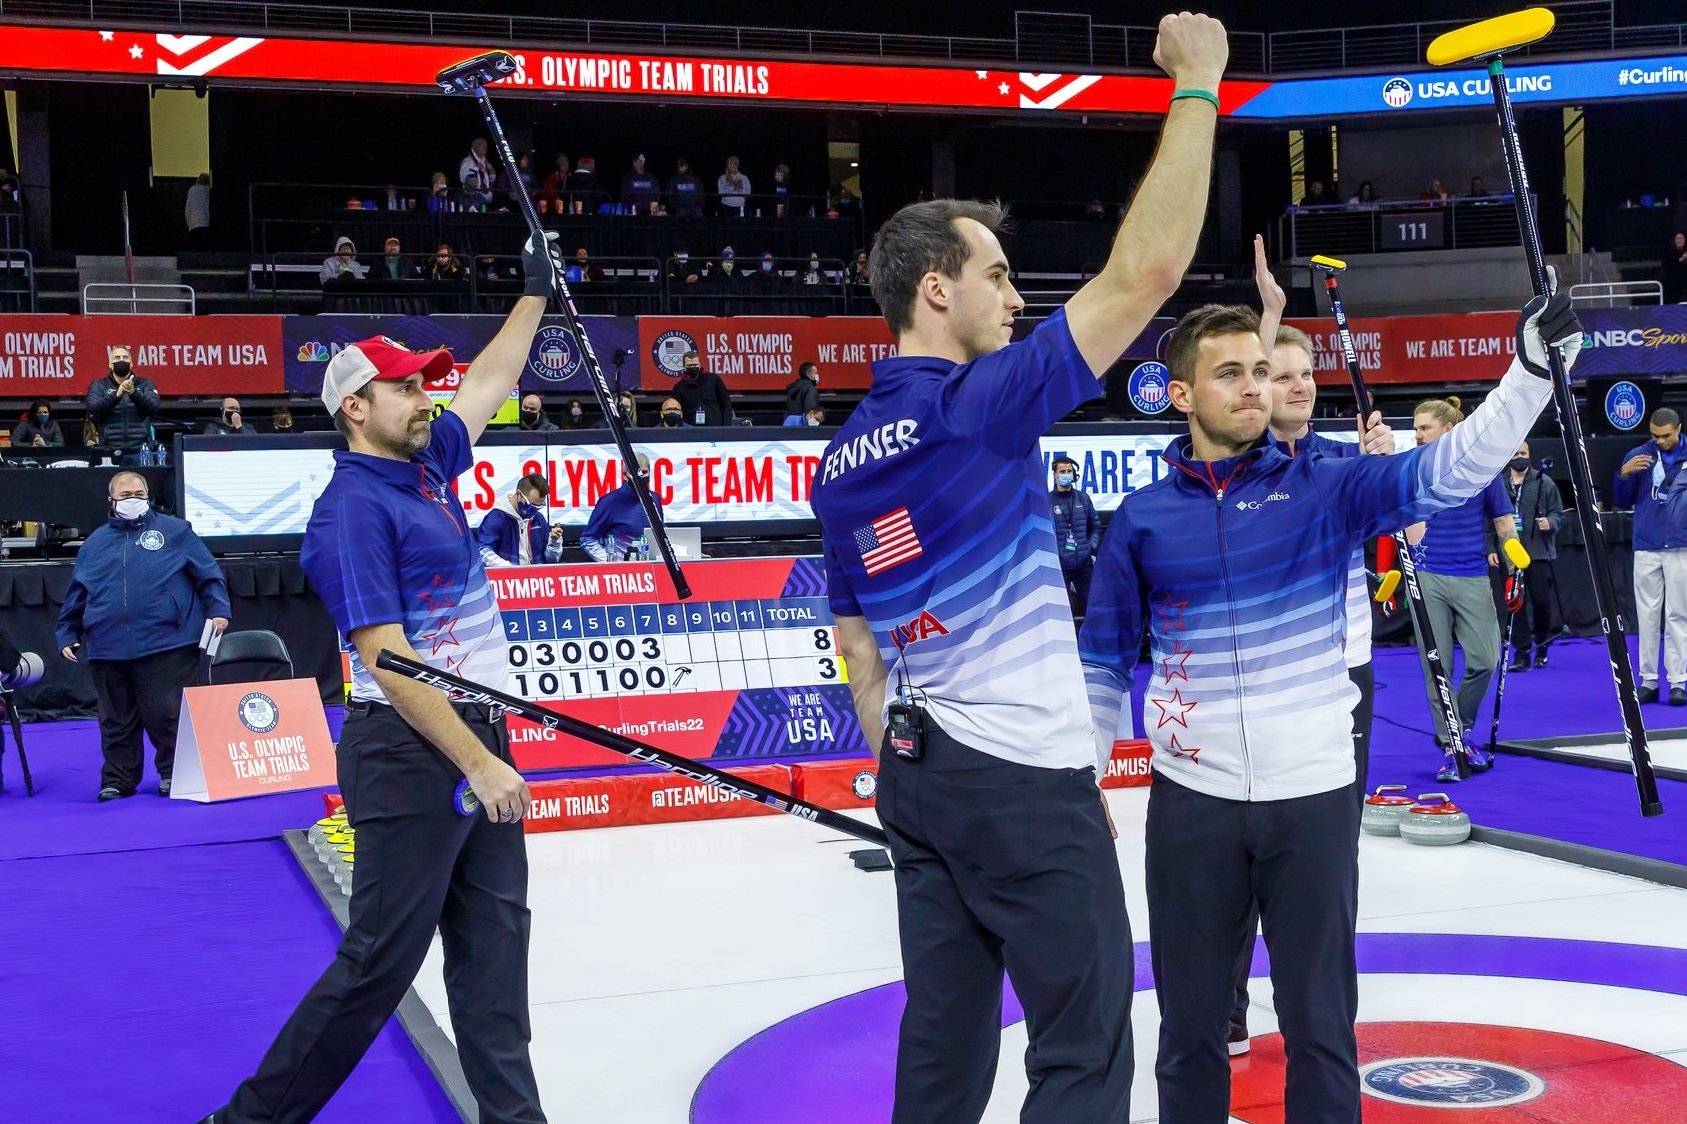 TEAM USA SCHEDULE AT WORLD MENS CURLING CHAMPIONSHIP 2022 — USA CURLING